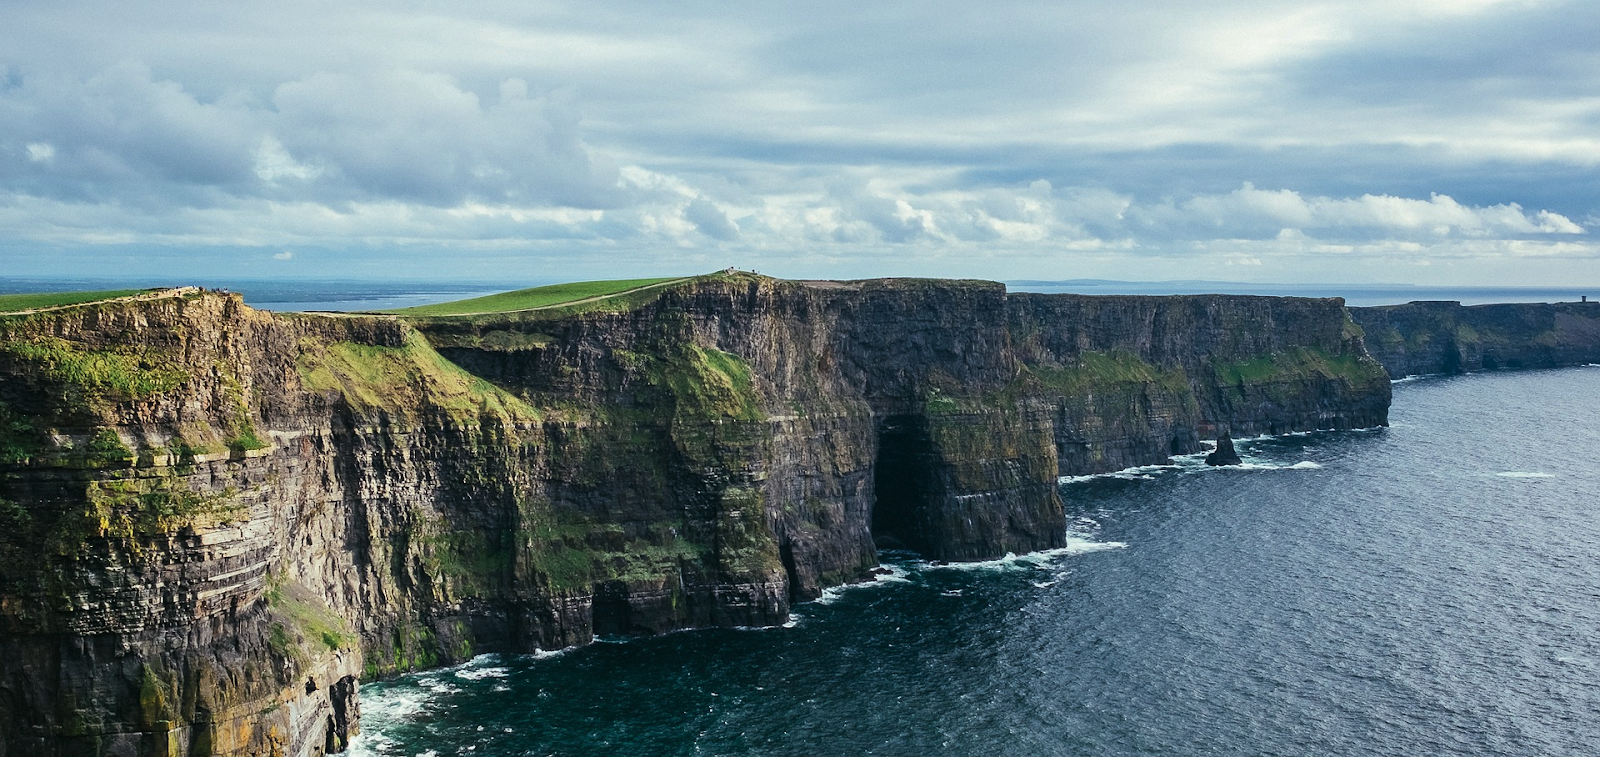 The Cliffs of Moher — County Clare